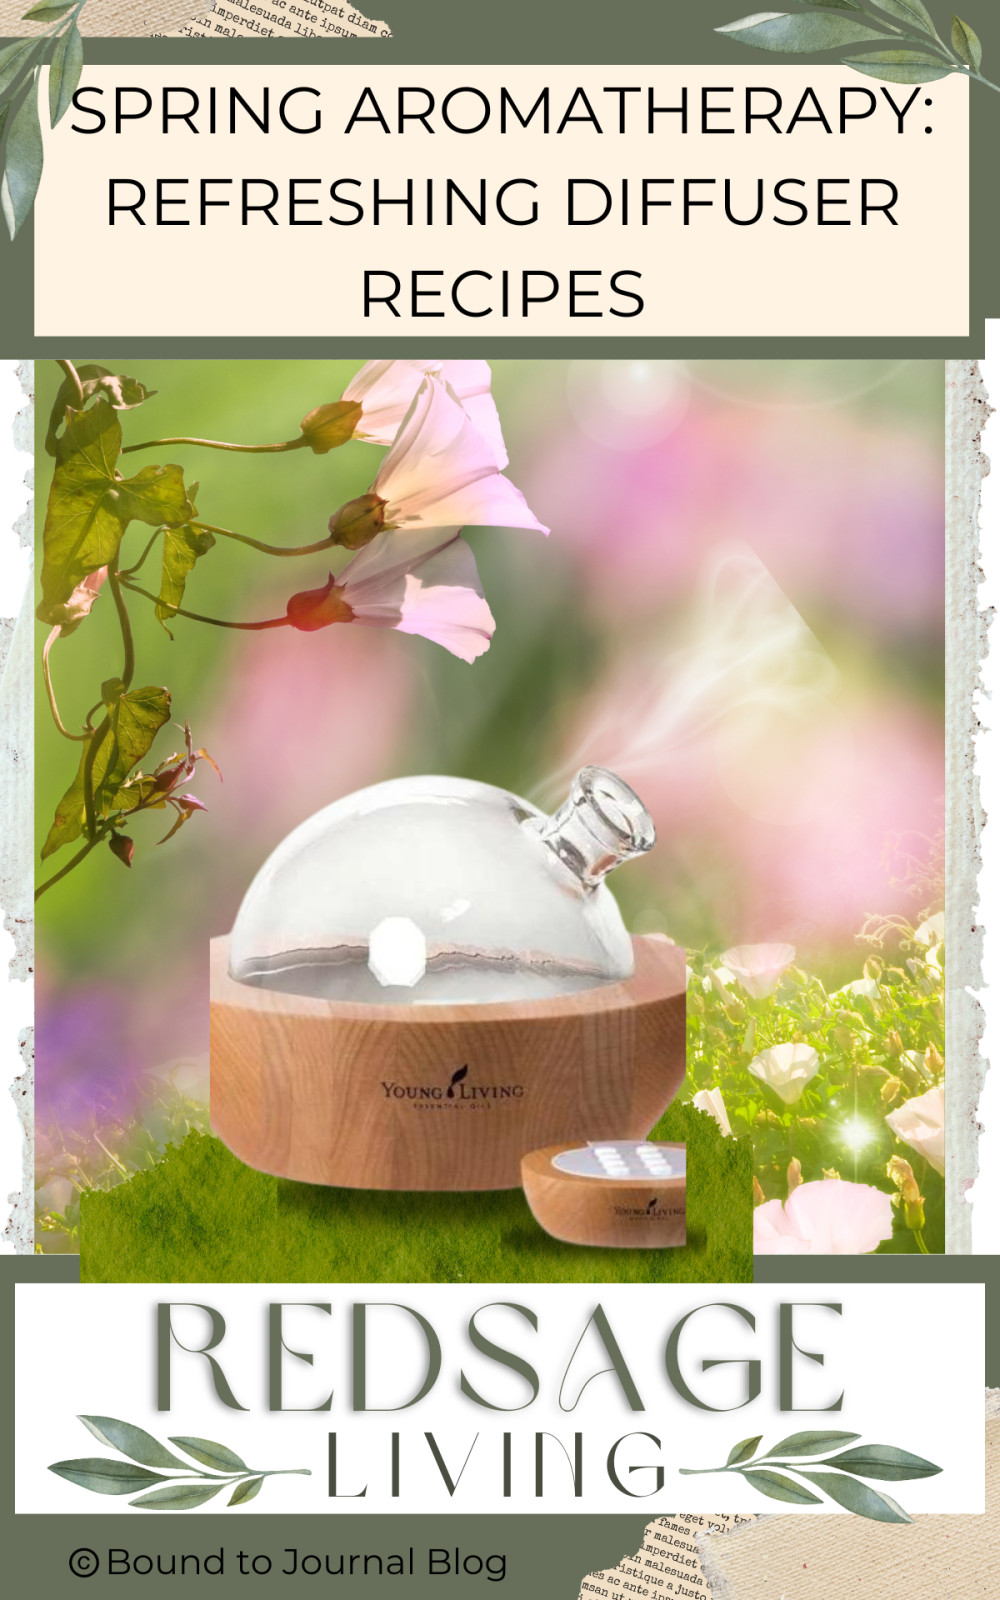 Spring Aromatherapy: Refreshing Diffuser Recipes